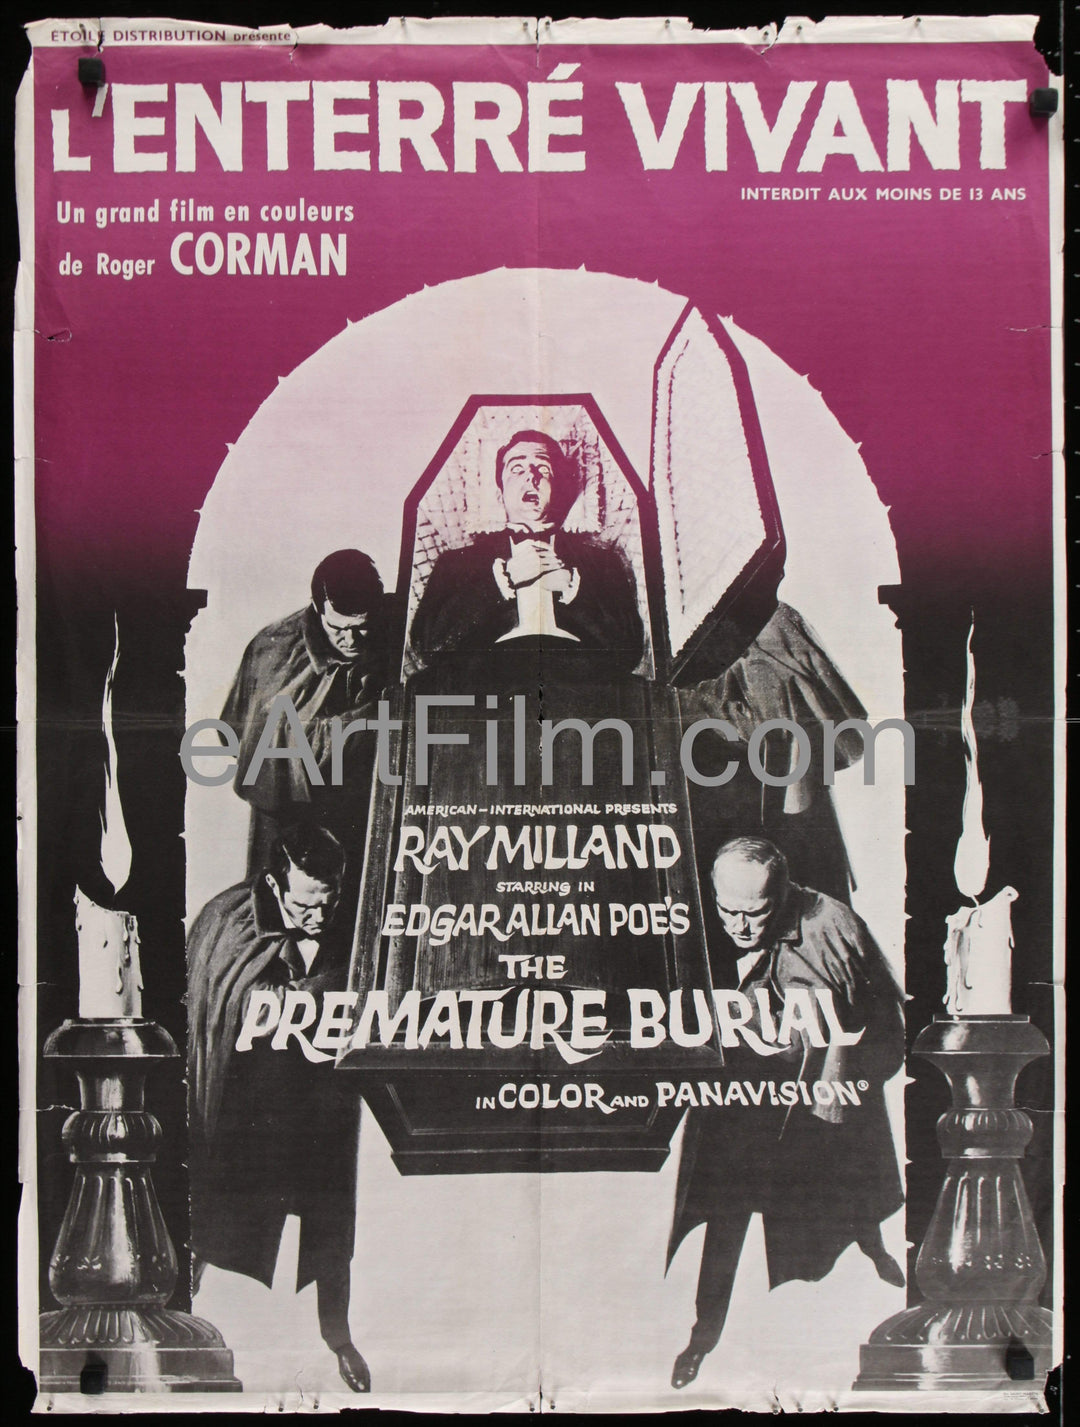 eArtFilm.com French Affiche Movie Poster (23.5"x31.5") Premature Burial-Edgar Allan Poe-Roger Corman-Ray Milland-French-24x32-1968